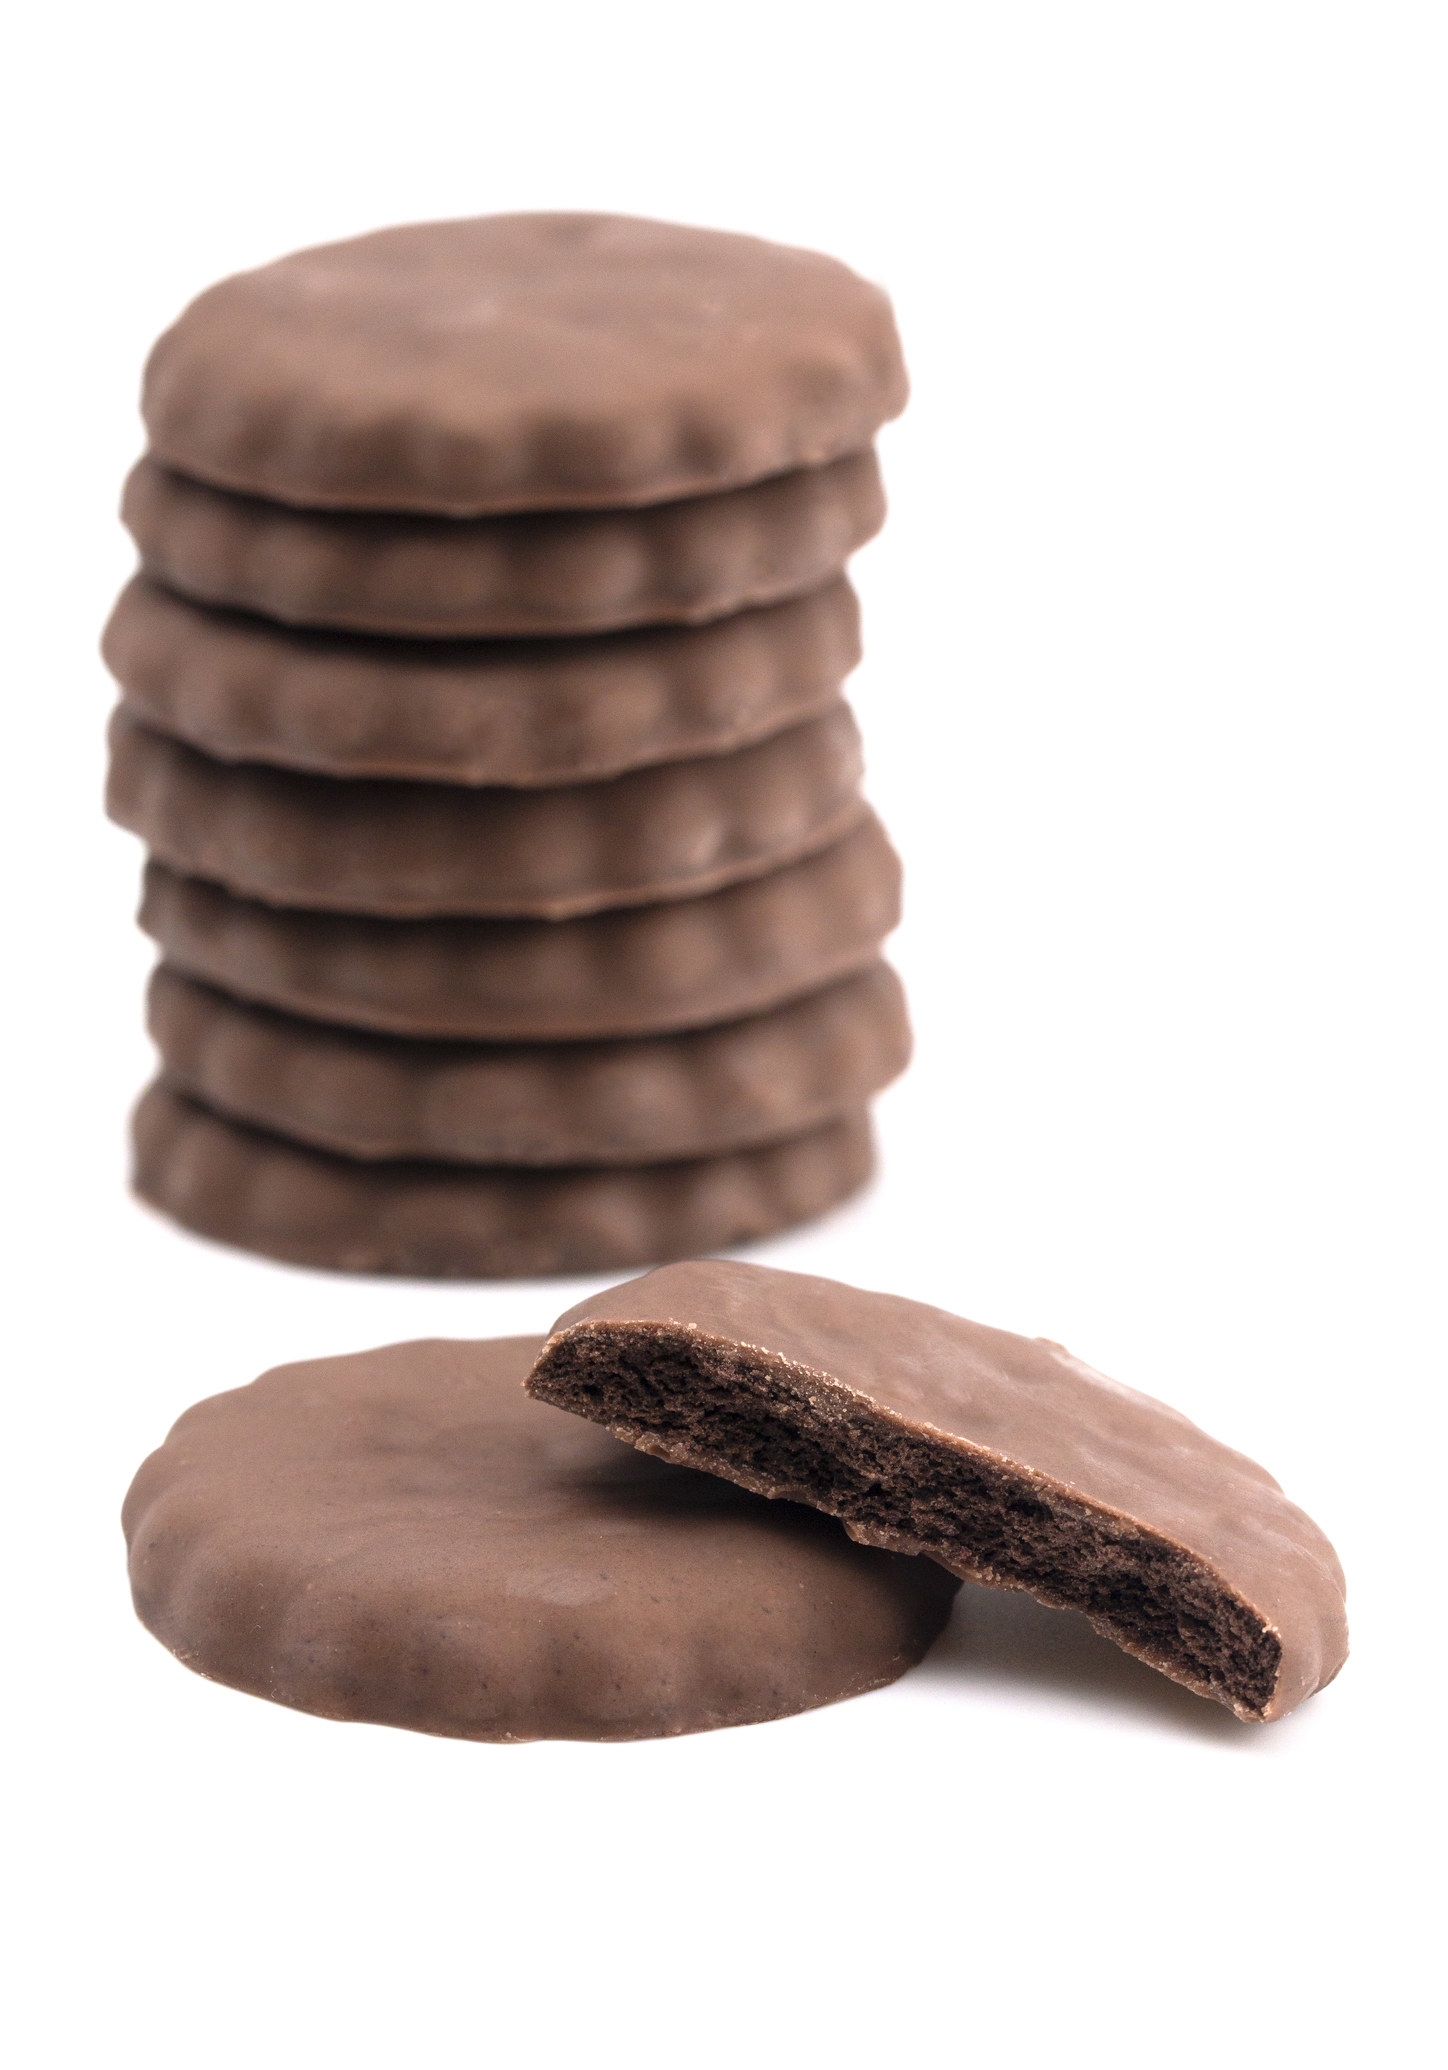 A stack of Girl Scout Thin Mints